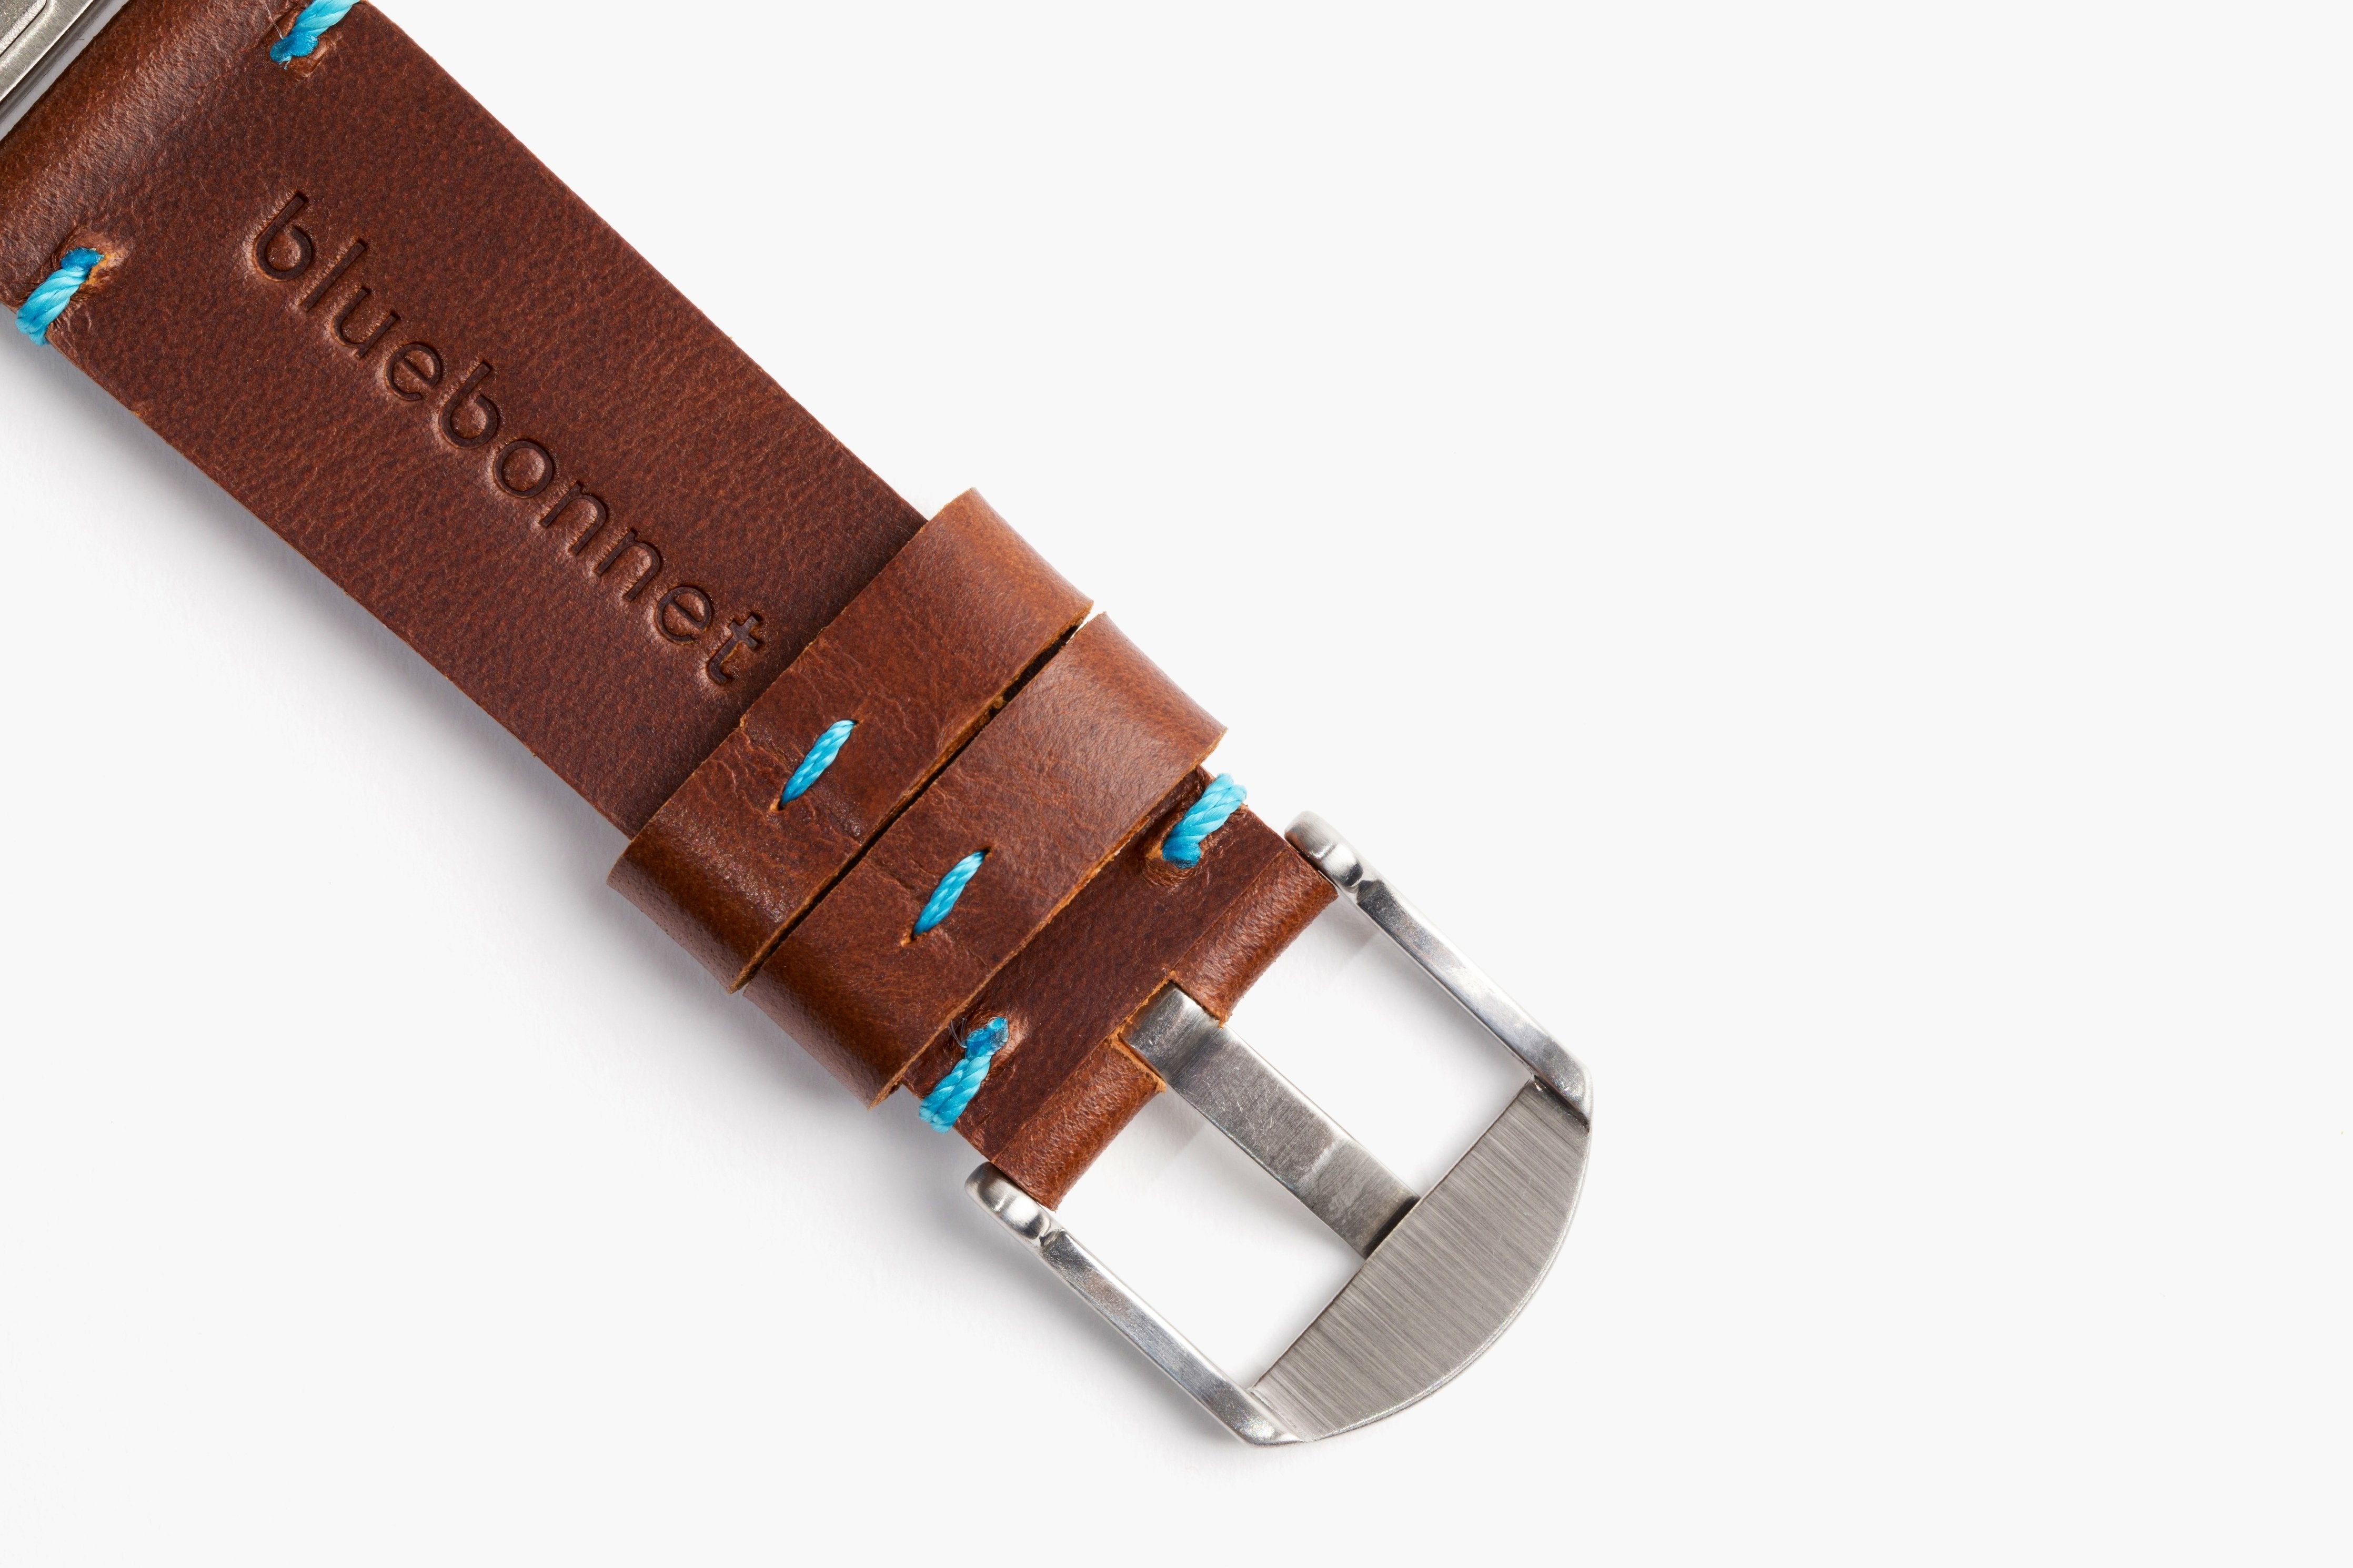 New Spigen Enzo Apple Series 9 leather band hits at $27